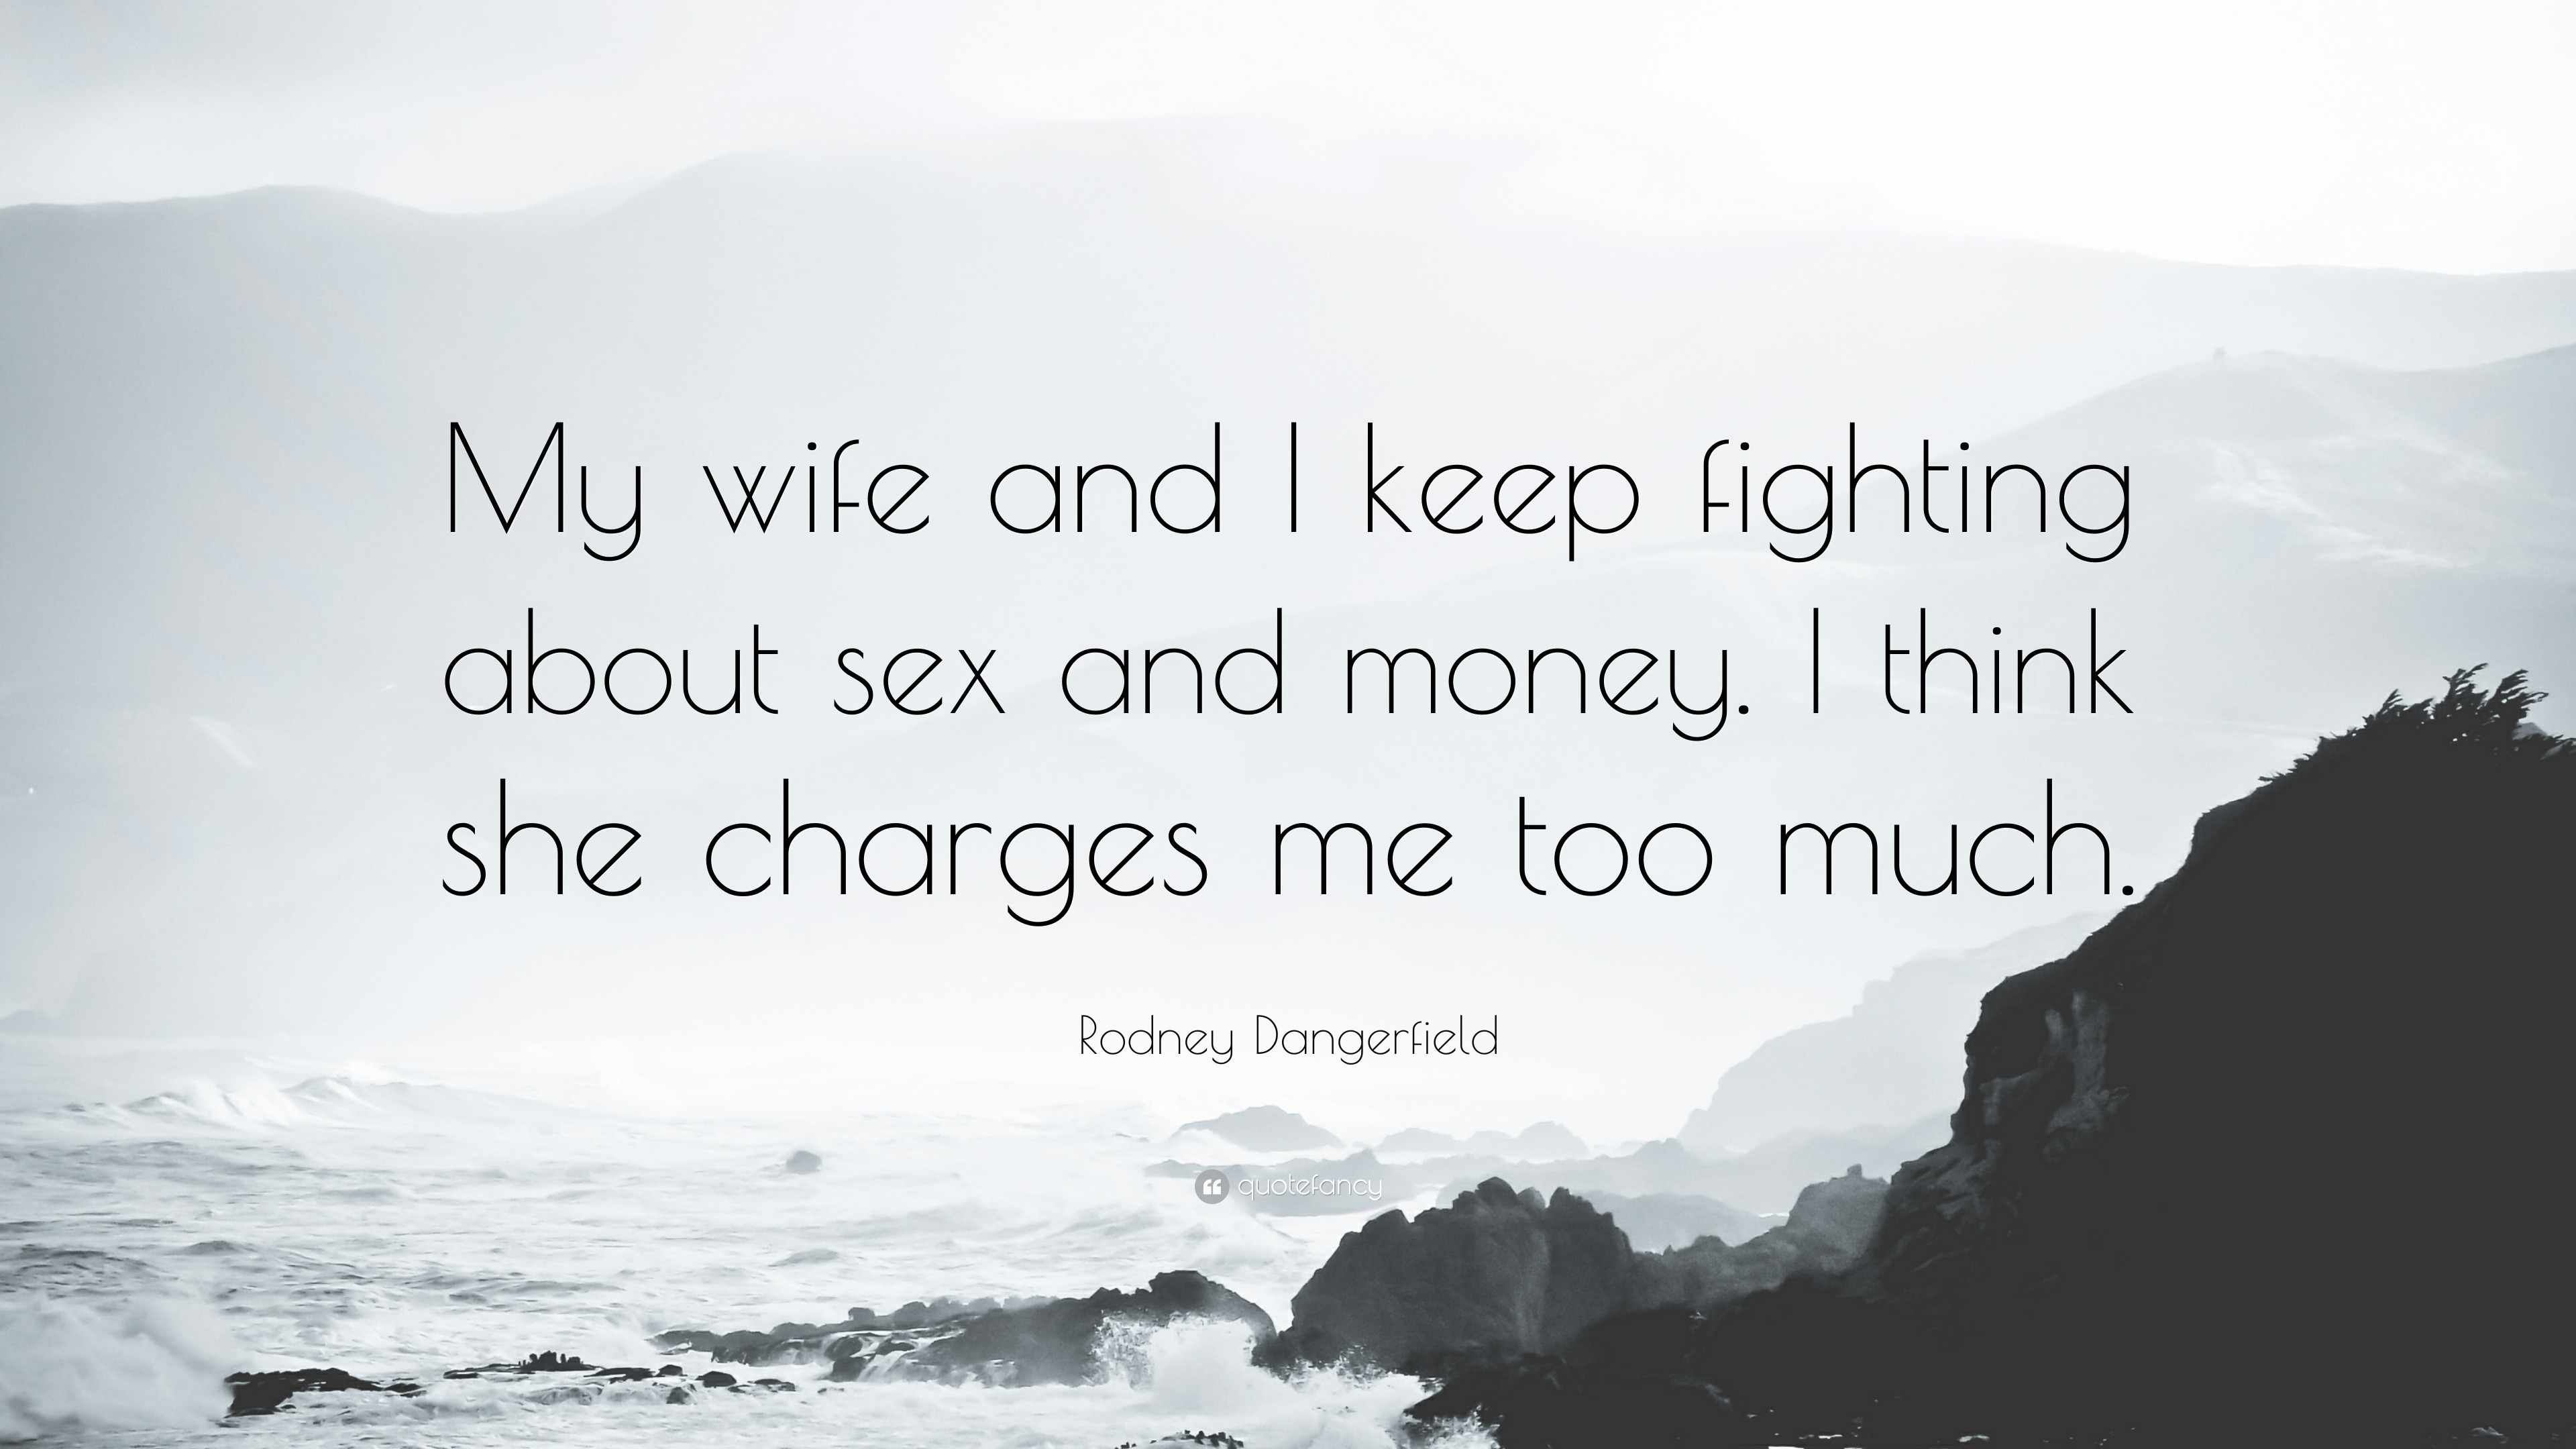 Rodney Dangerfield Quote “My wife and I keep fighting about sex and money